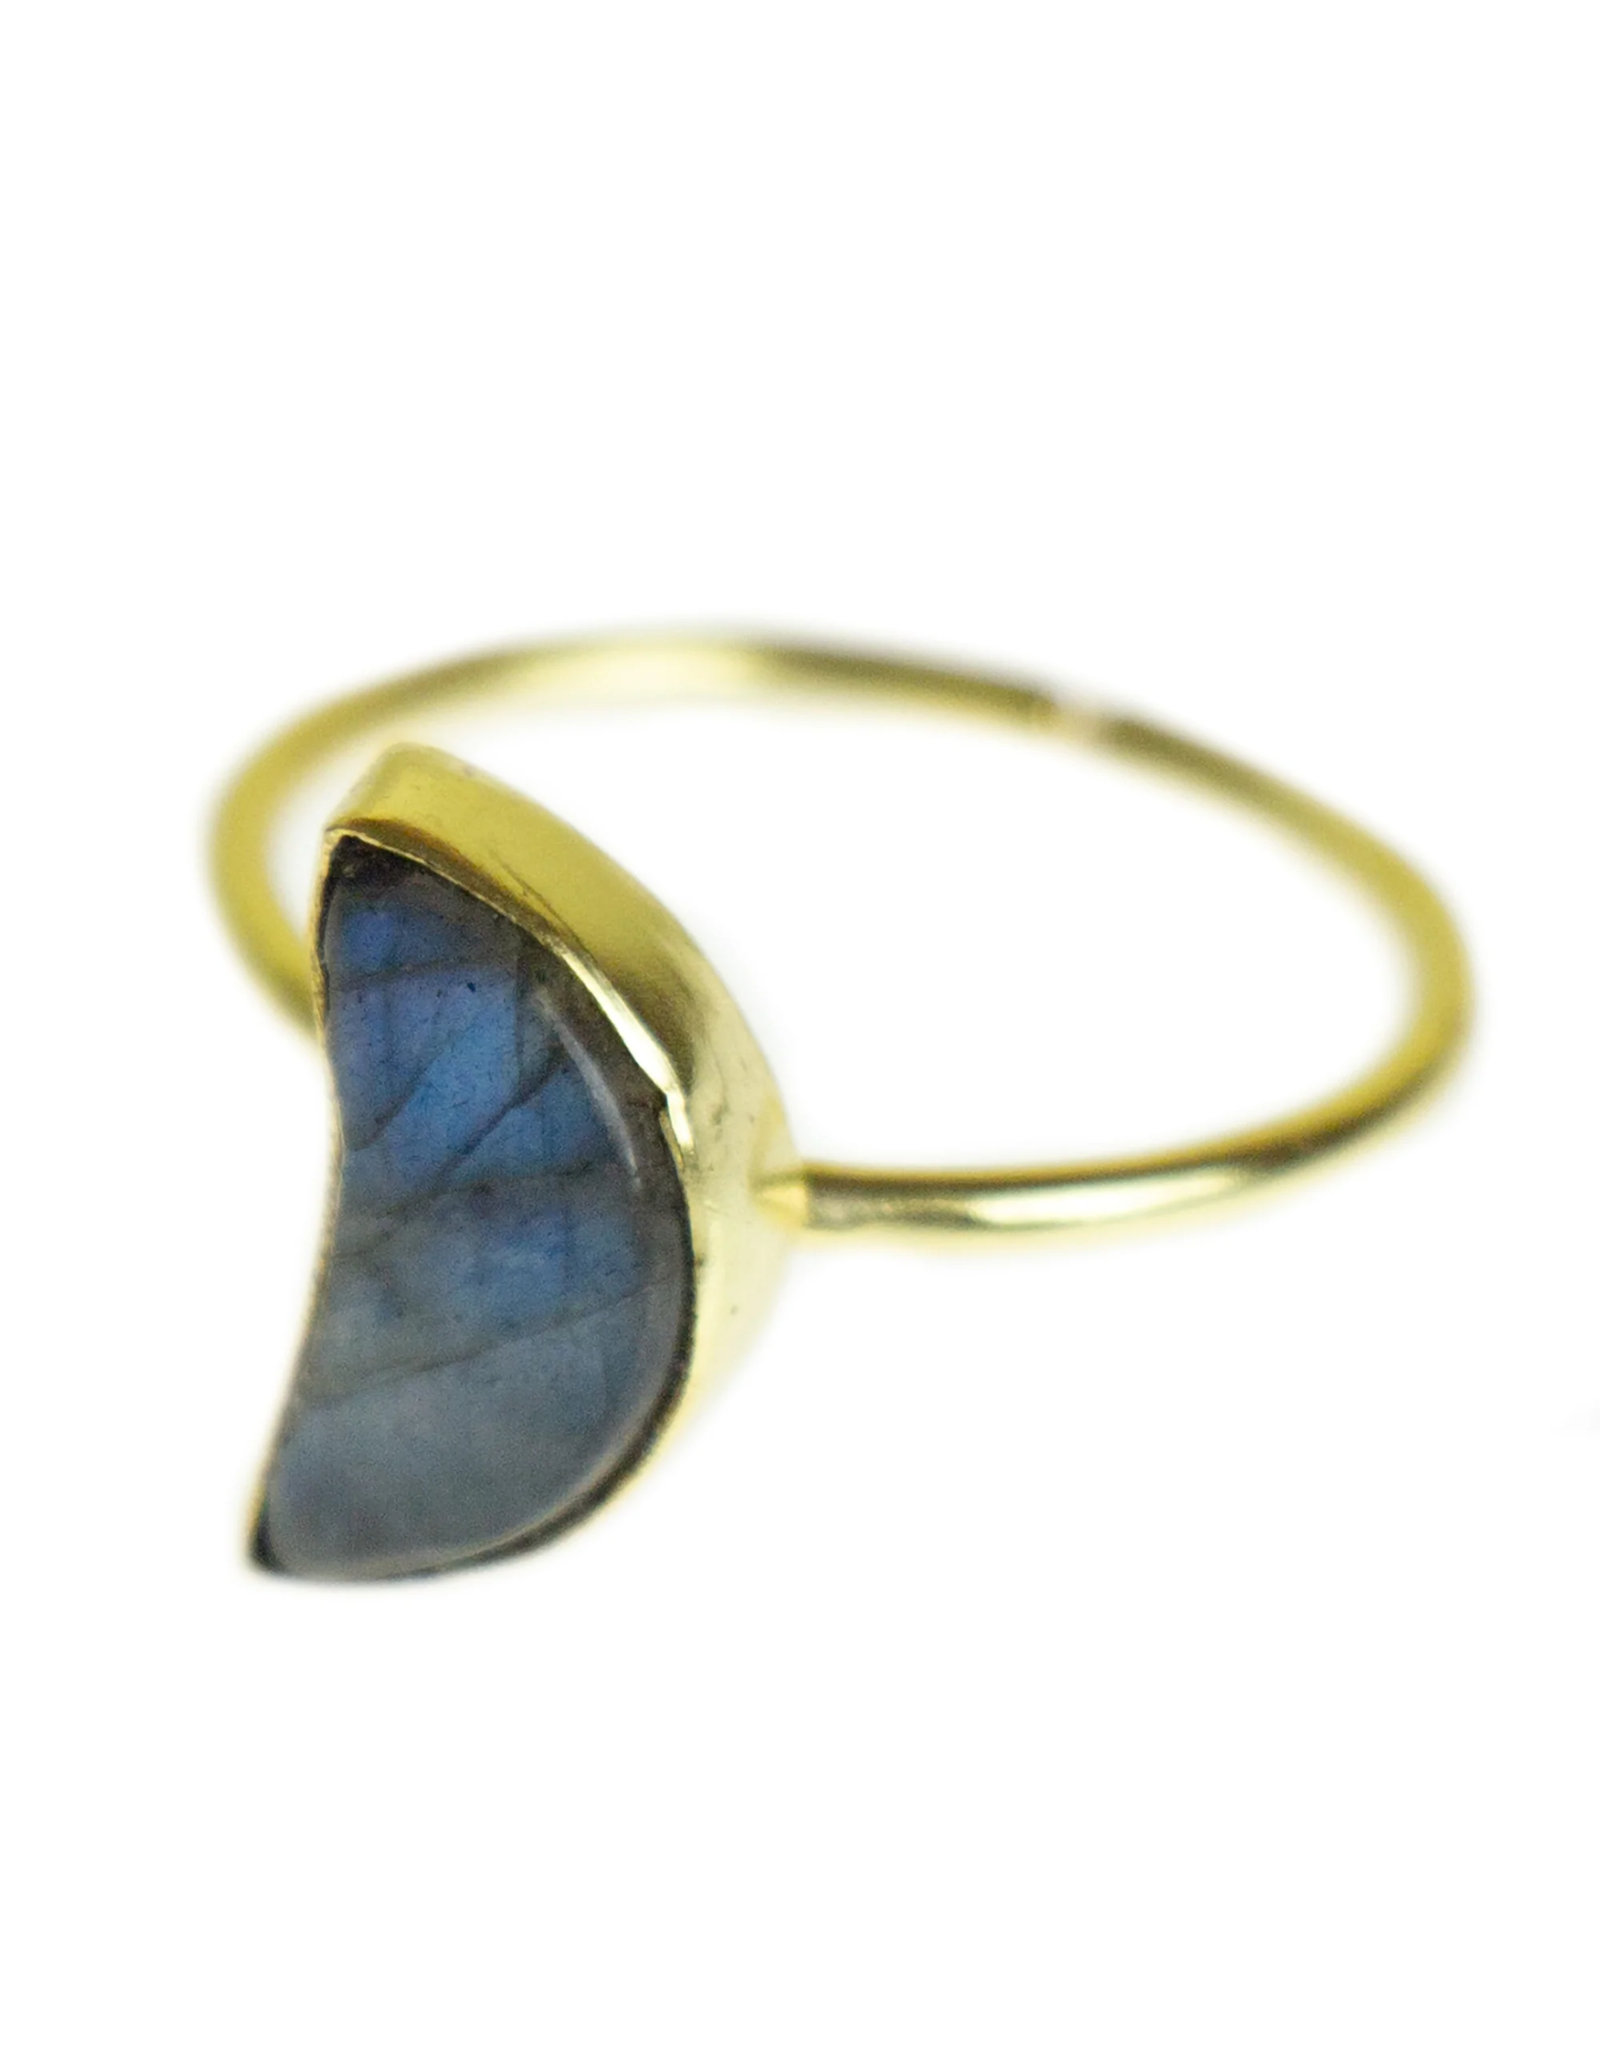 India CLEARANCE Labradorite Crescent Moon Brass Ring, India